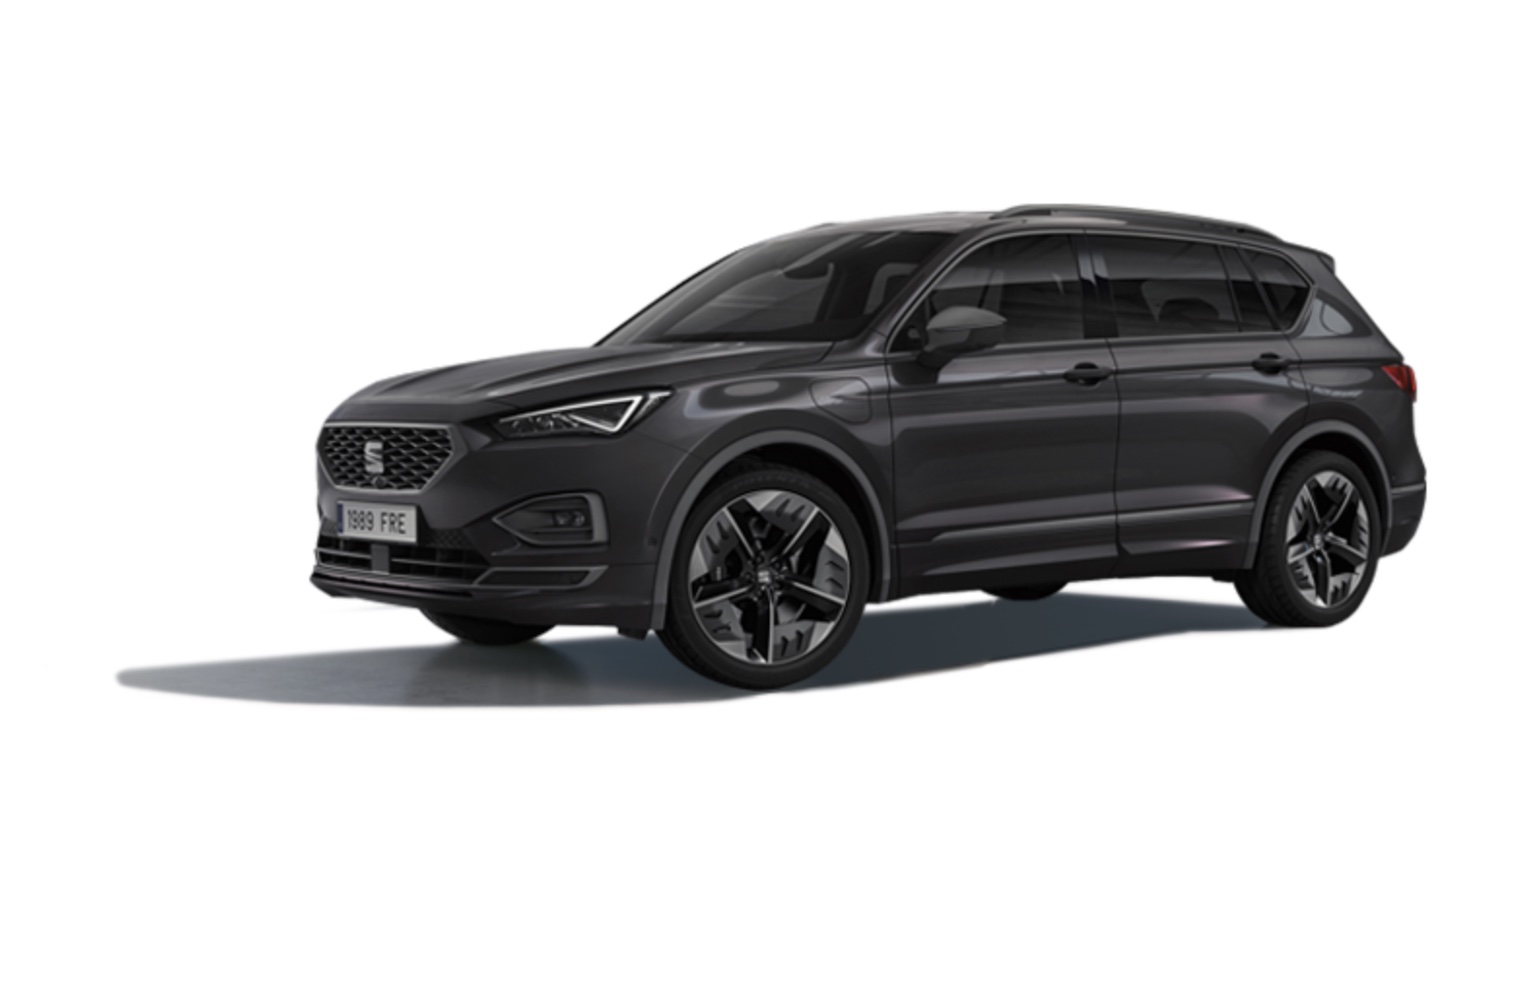 Charging your Seat Tarraco e-hybrid